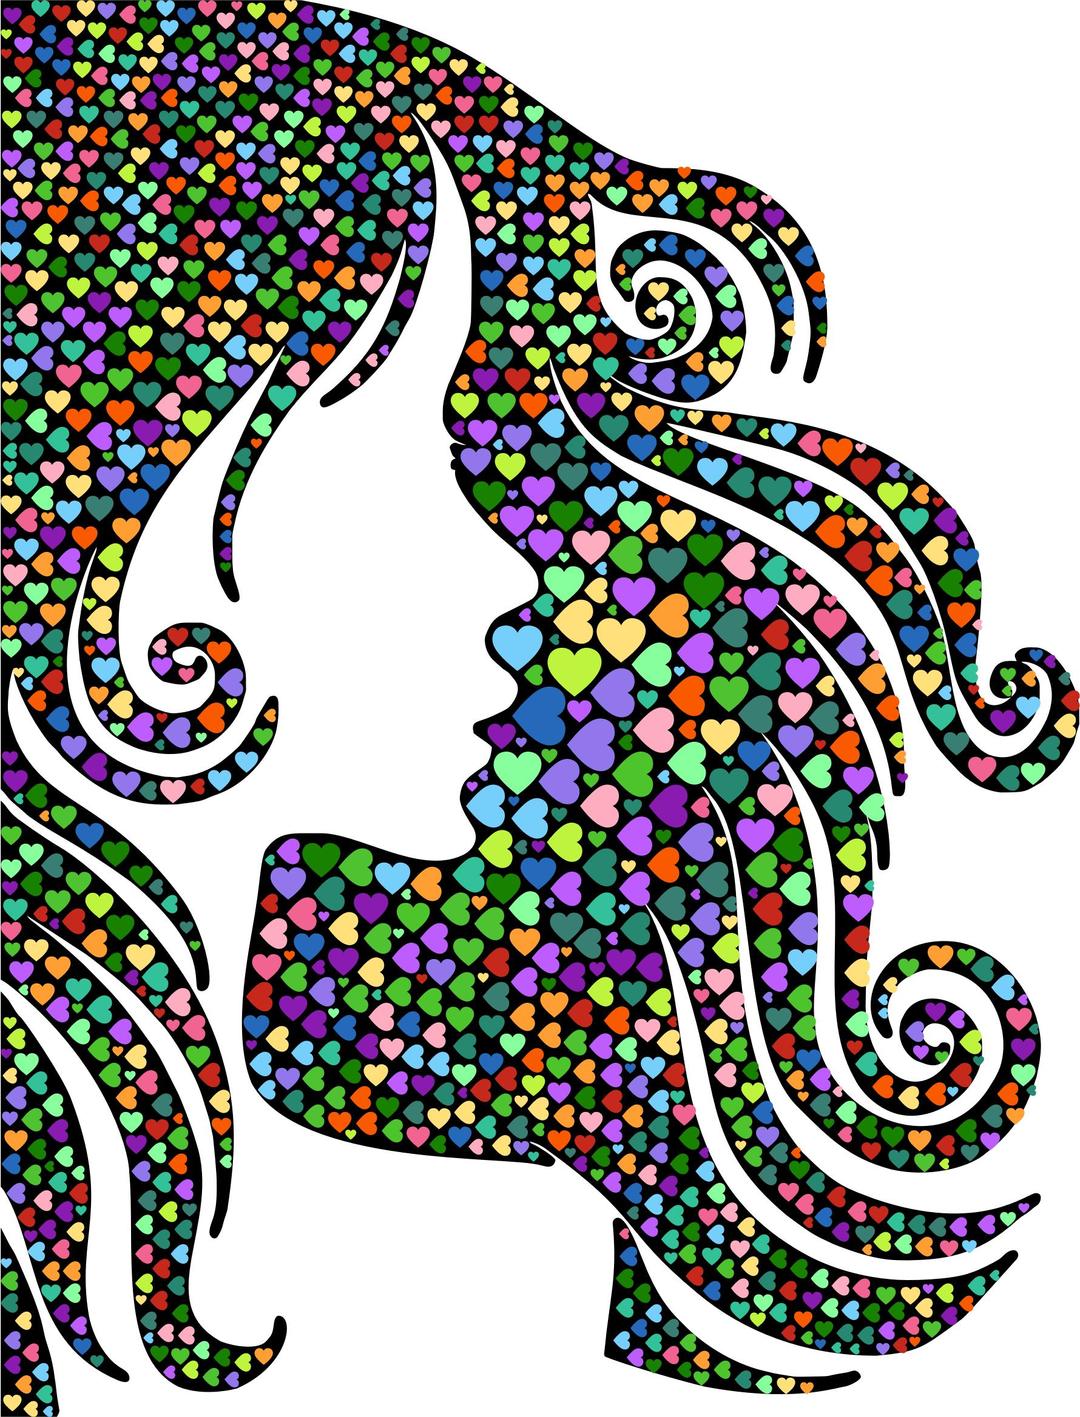 Female Hair Profile Silhouette Hearts png transparent